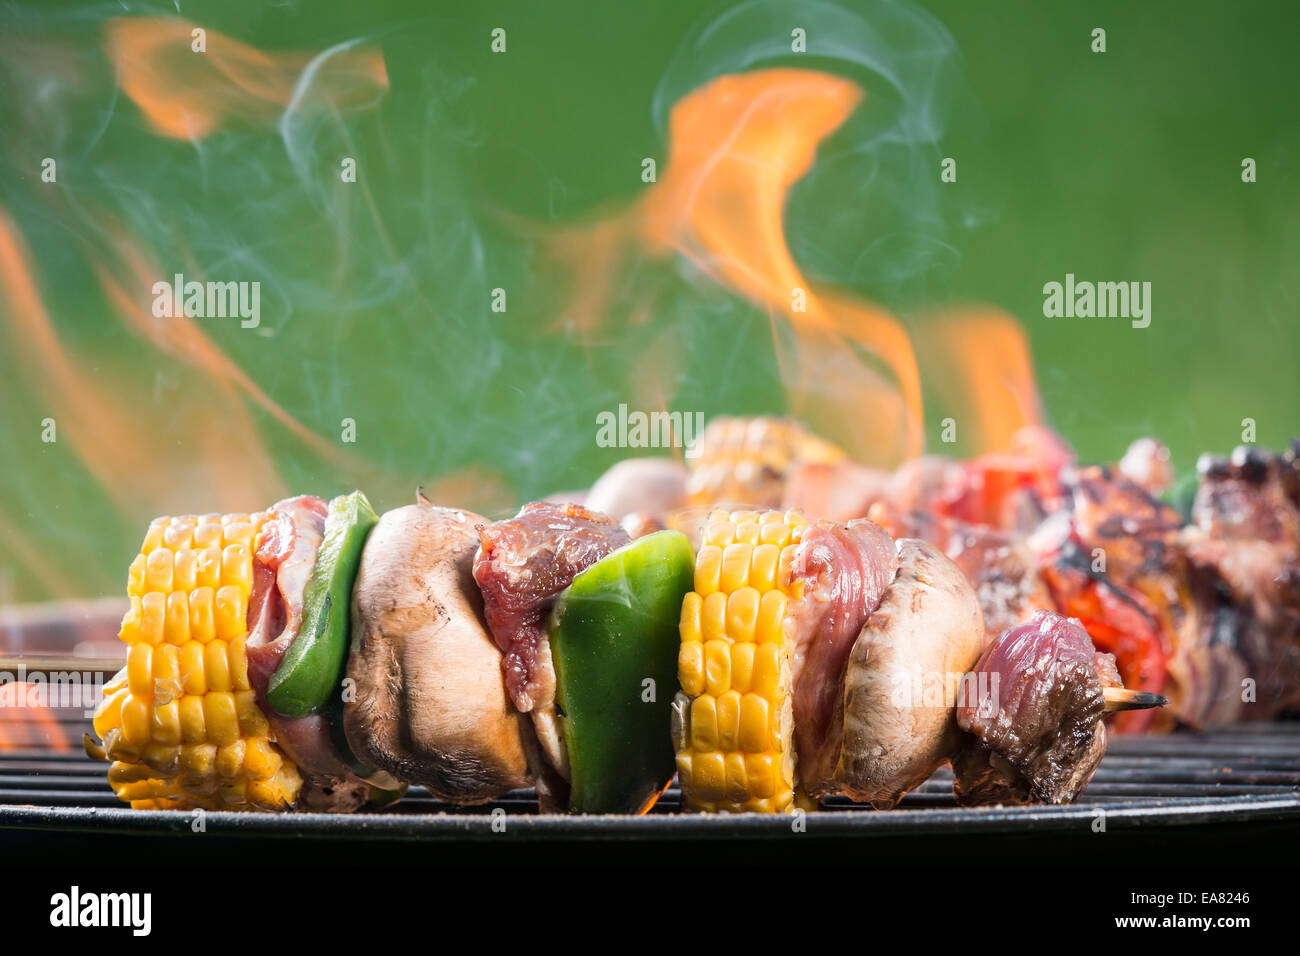 Delicious grilled meat skewers on fire Stock Photo